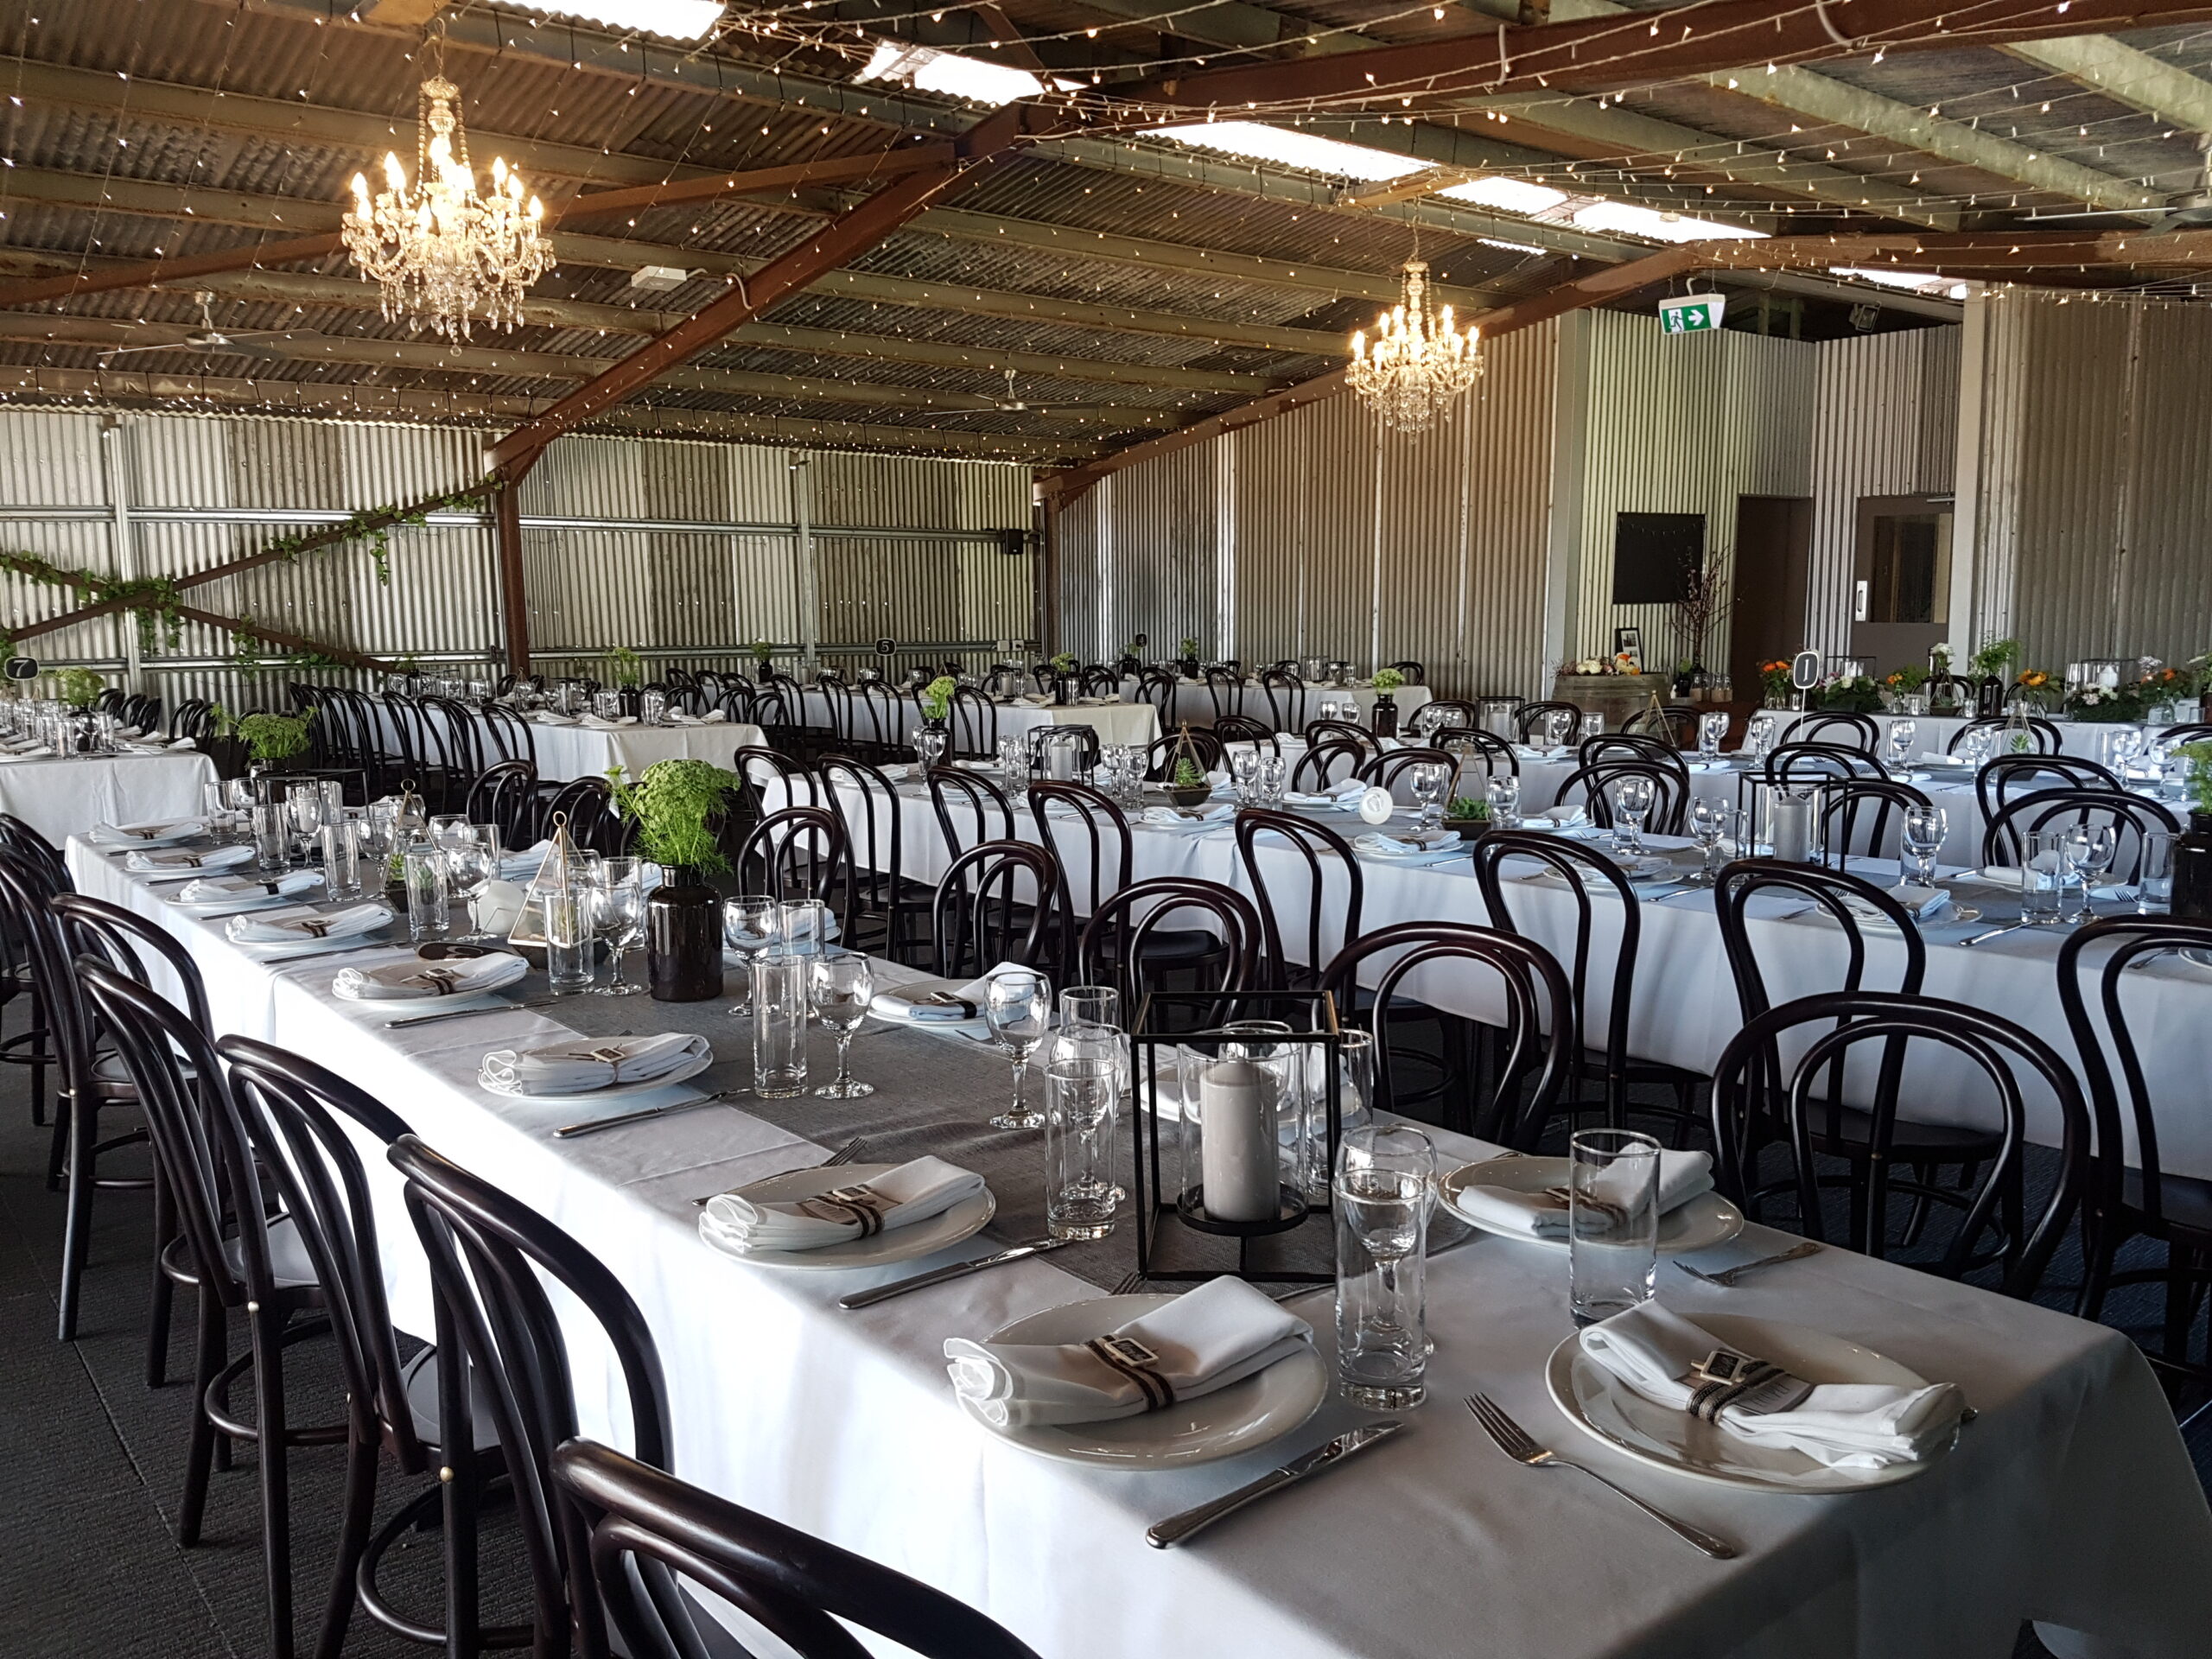 Rustic Wedding Reception with Timber Bentwood Chairs and White Tablecloths